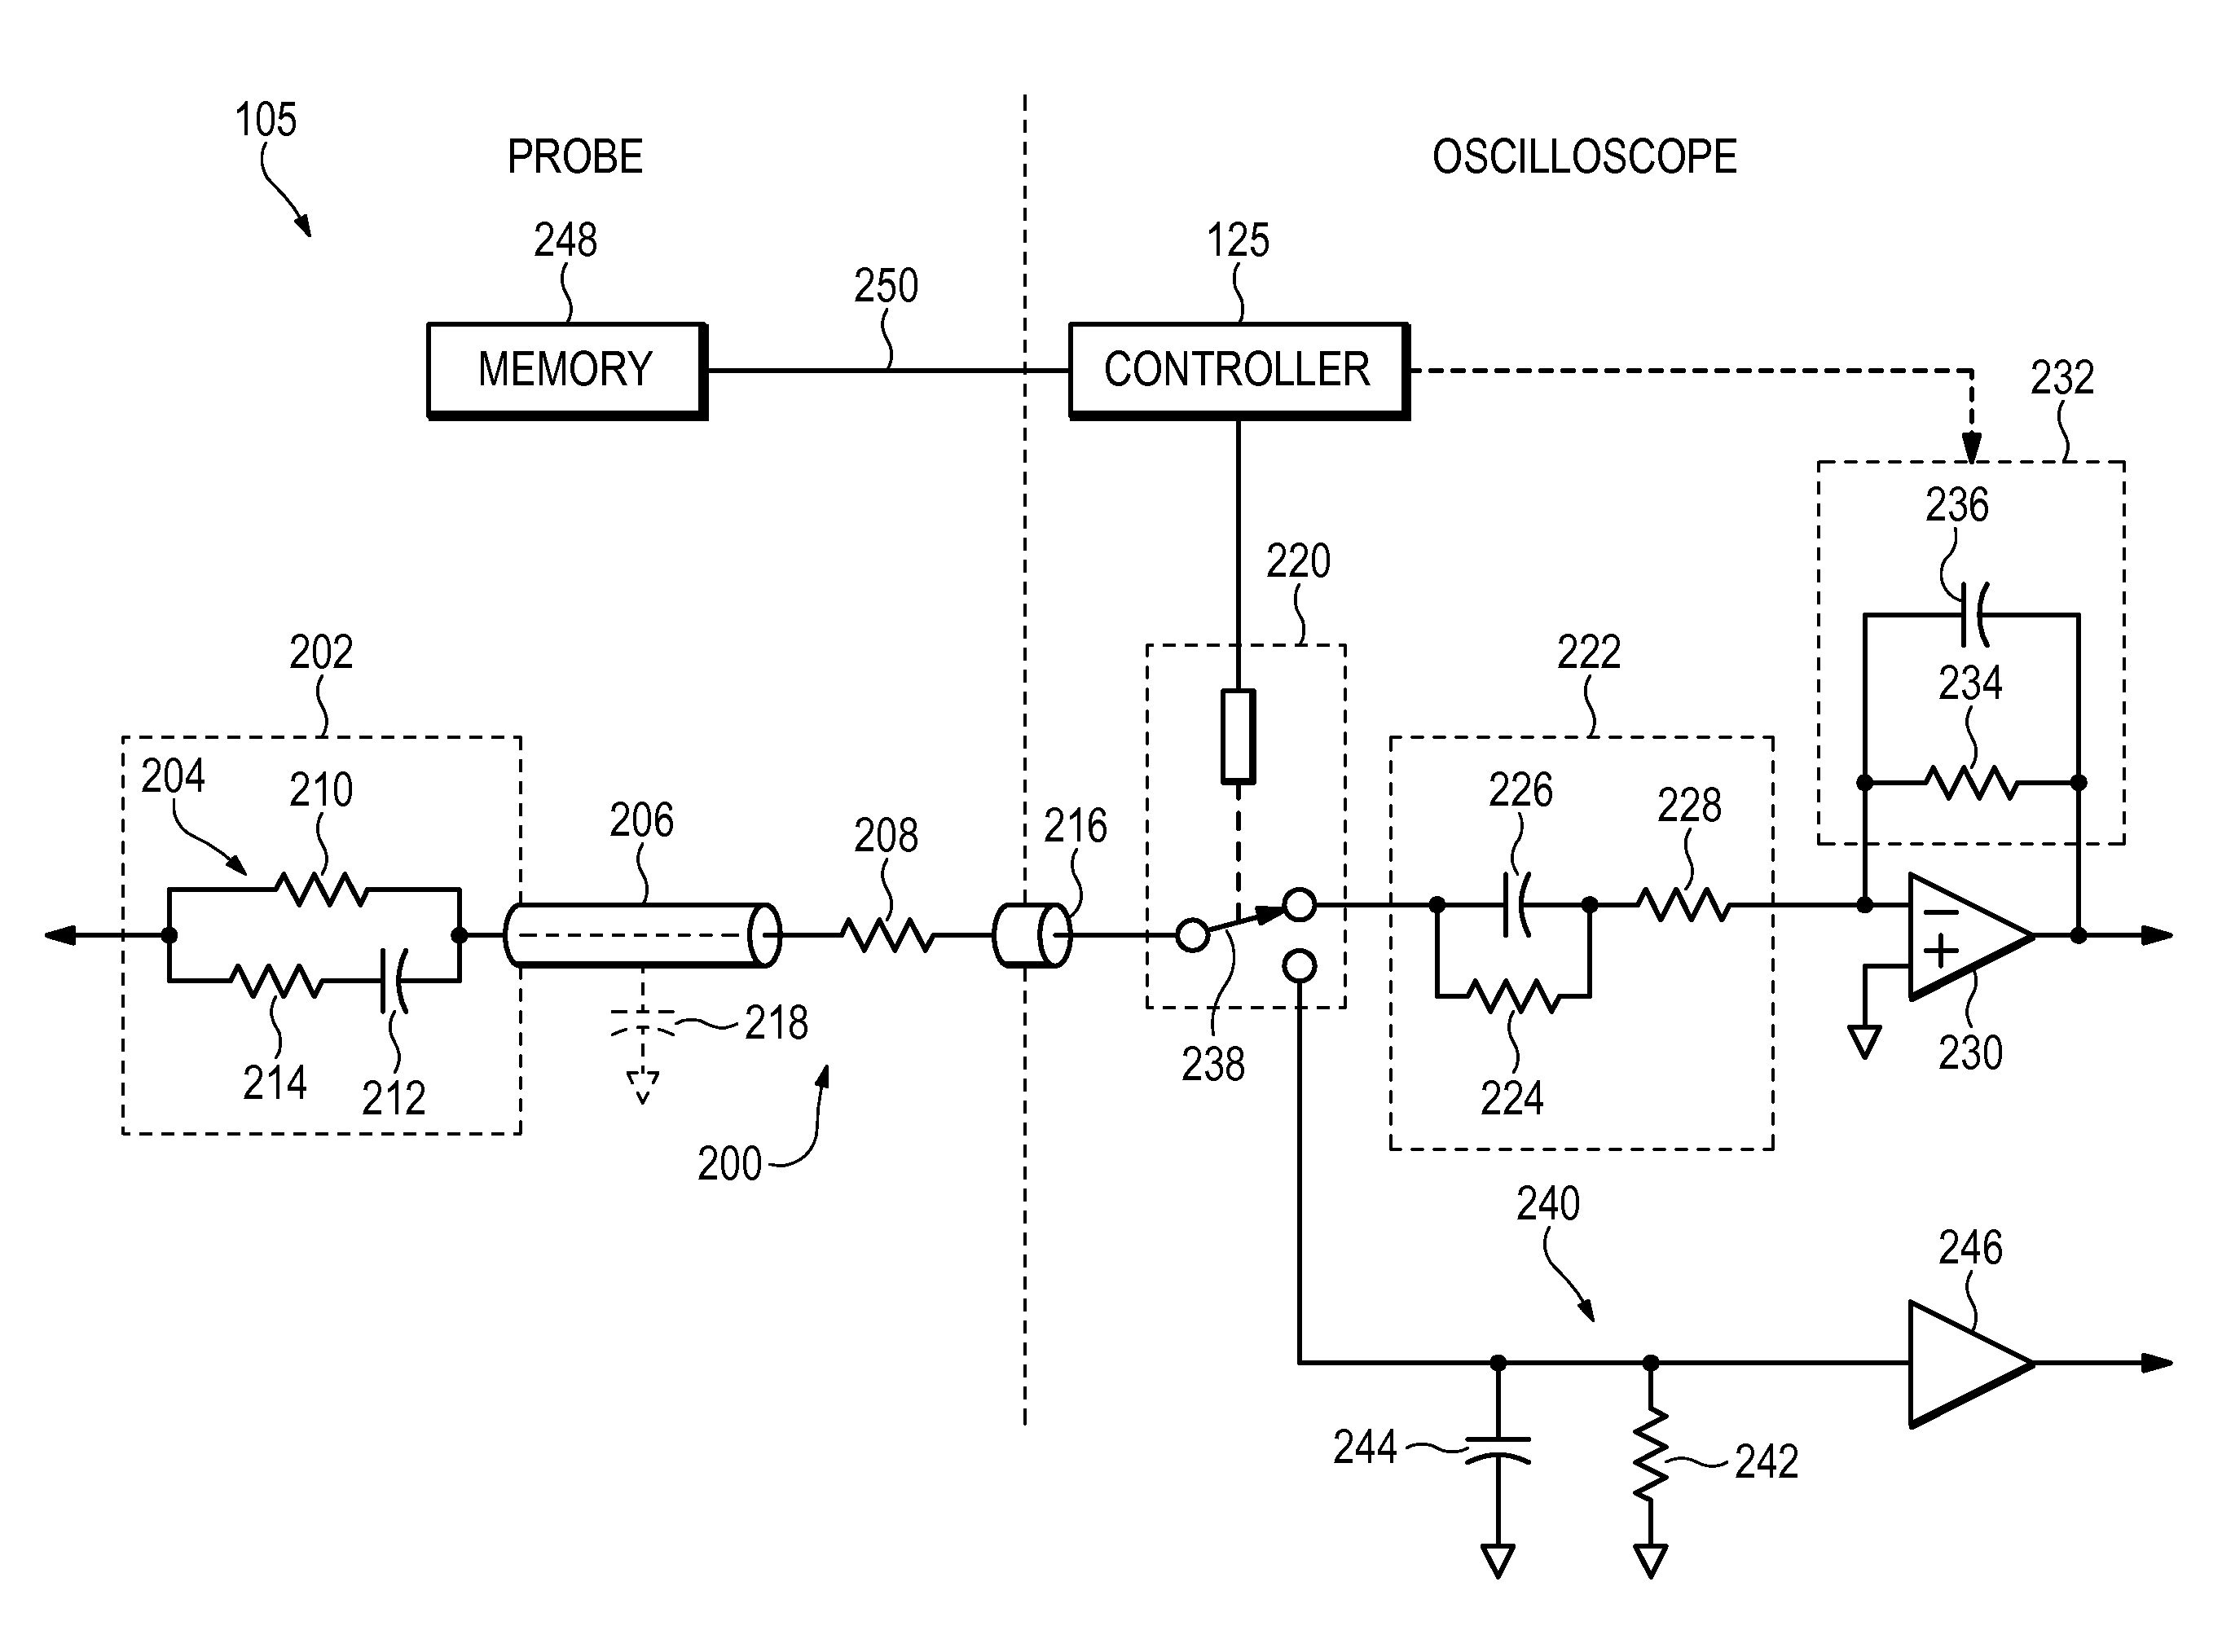 Signal Acquisition System Having Probe Cable Termination in a Signal Processing Instrument